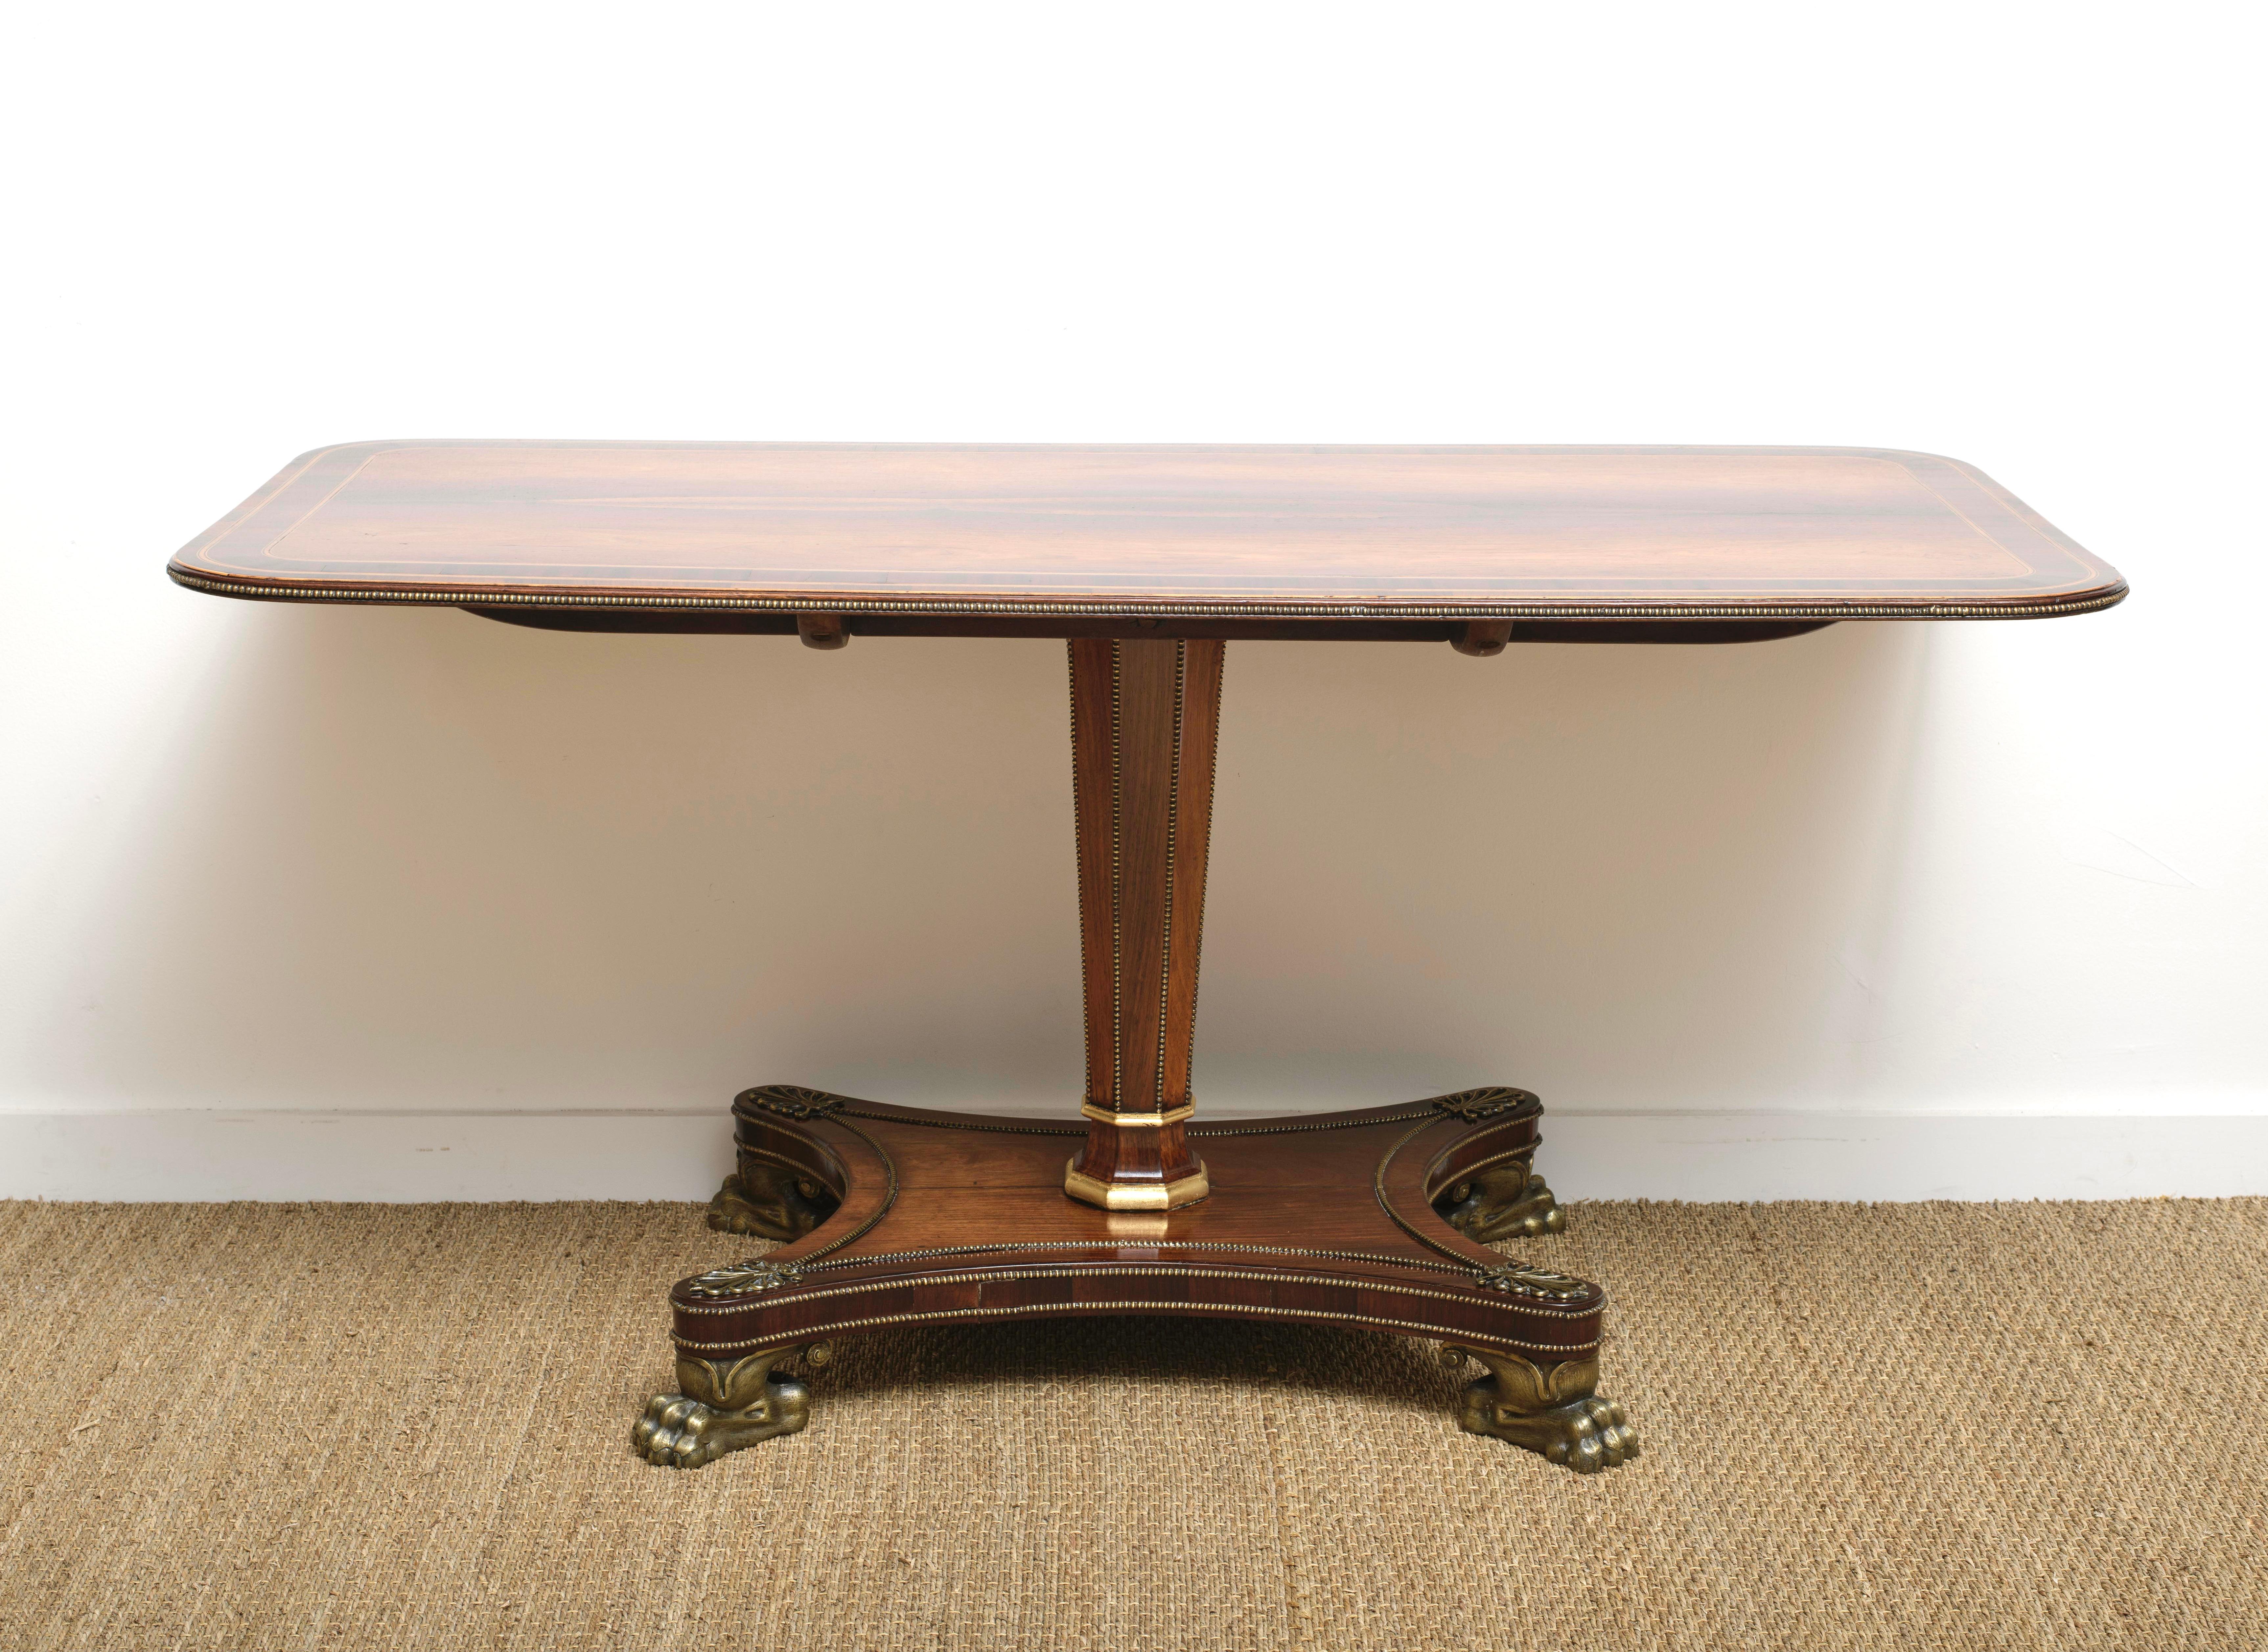 Striking Early 19th C. Regency Period Rosewood and Beaded Brass inlay Breakfast Table, on pedestal  with matching inlay resting on base with typical Regency decoration and Lion Paw solid brass feet.  